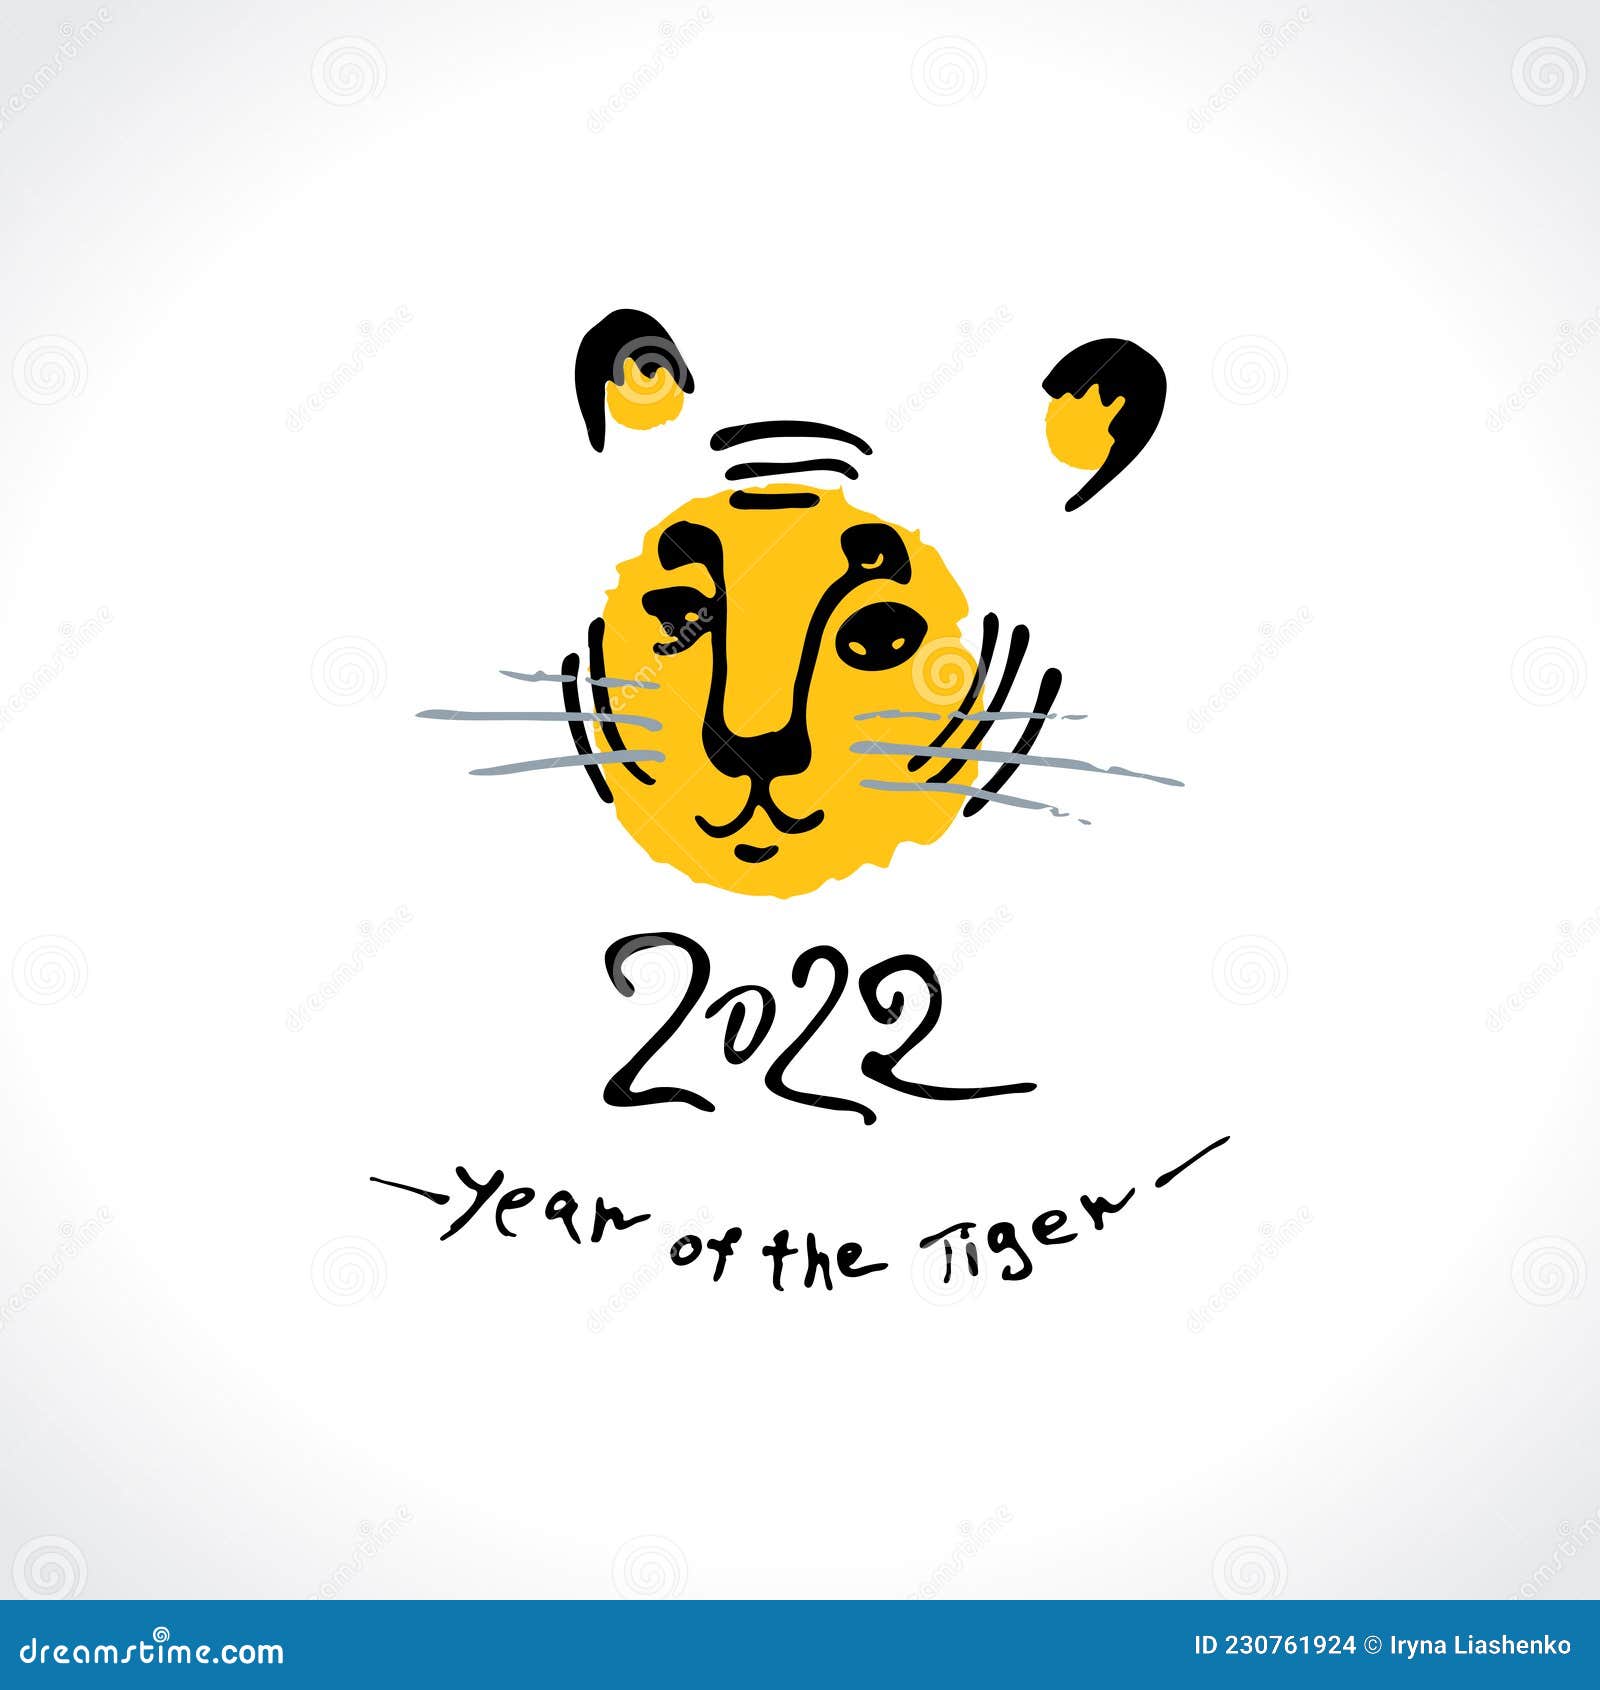 Year of the tiger 2022